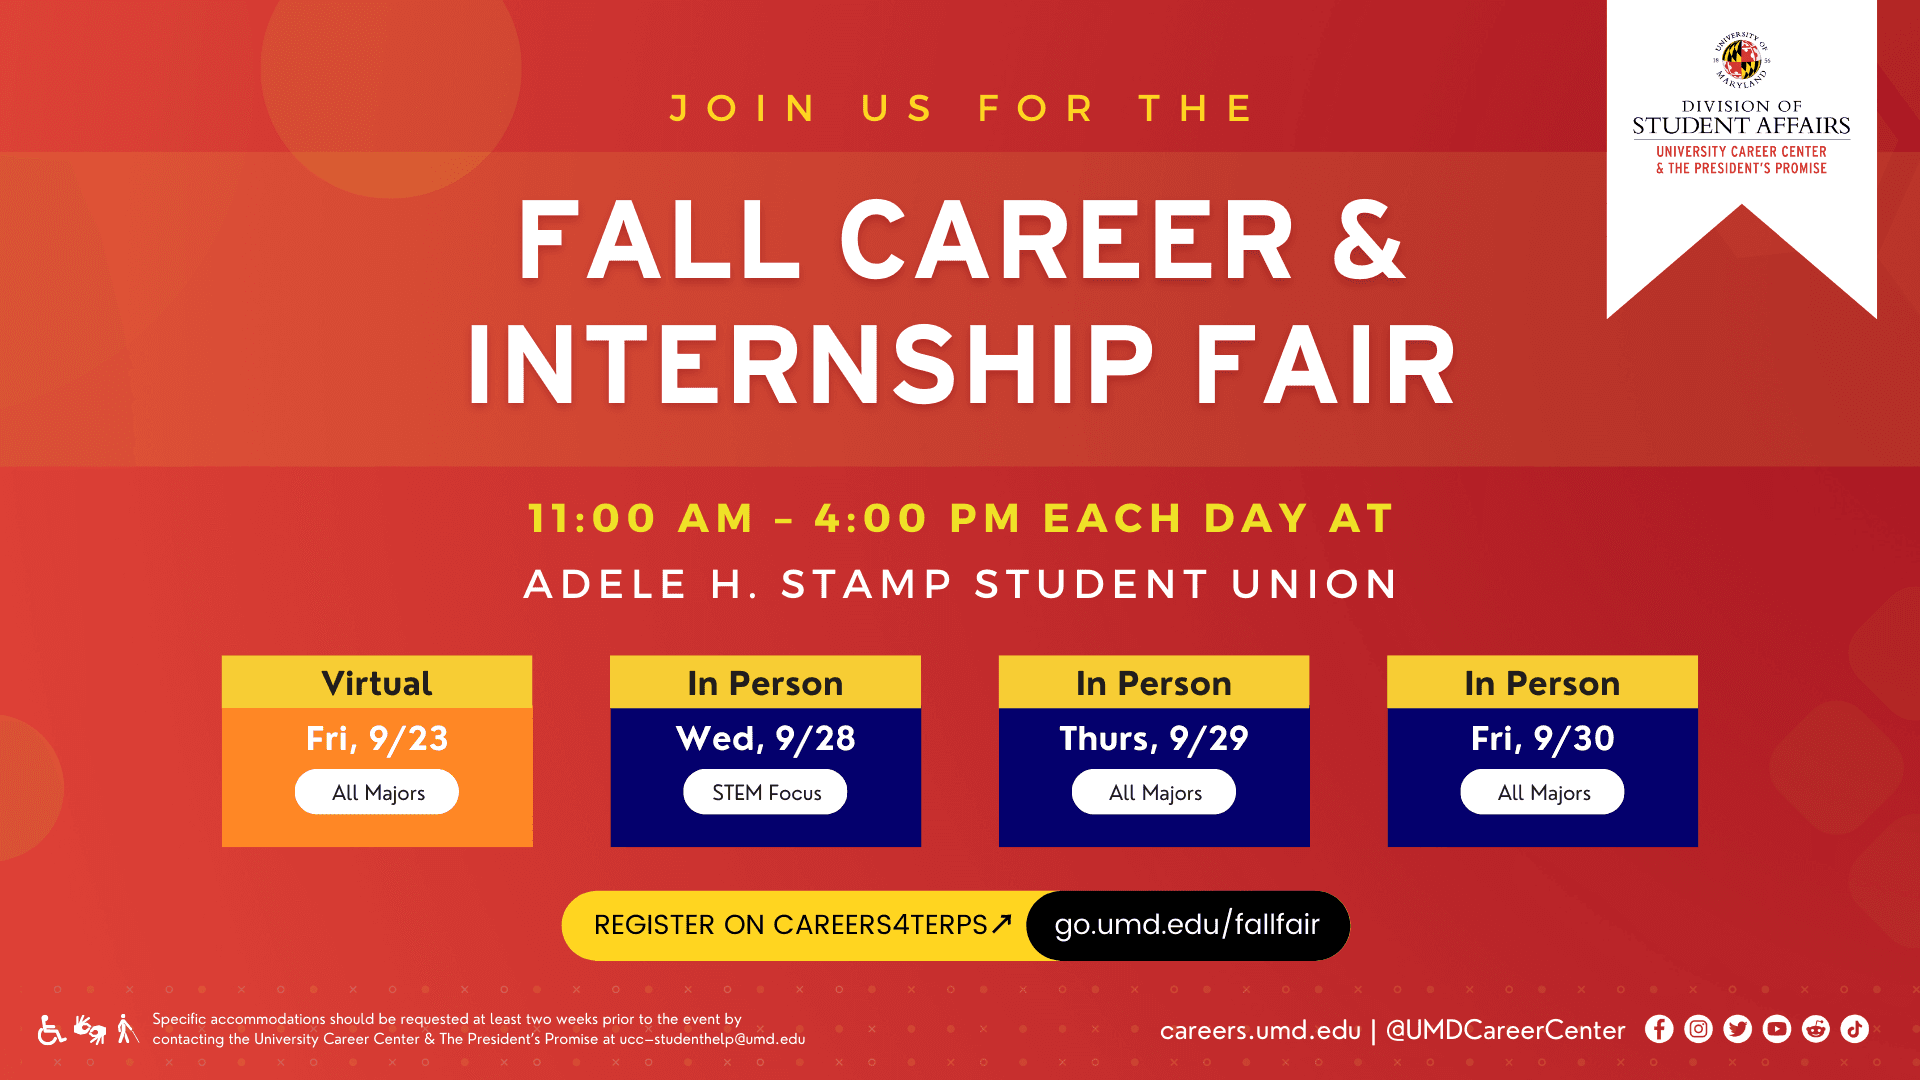 A promotional image of the Fall Career and Internship Fair which includes all the dates and times for the events as well as registration information. The bottom of the image includes the career center's website information and the social media handle. At the top right is the University Career Center's logo.